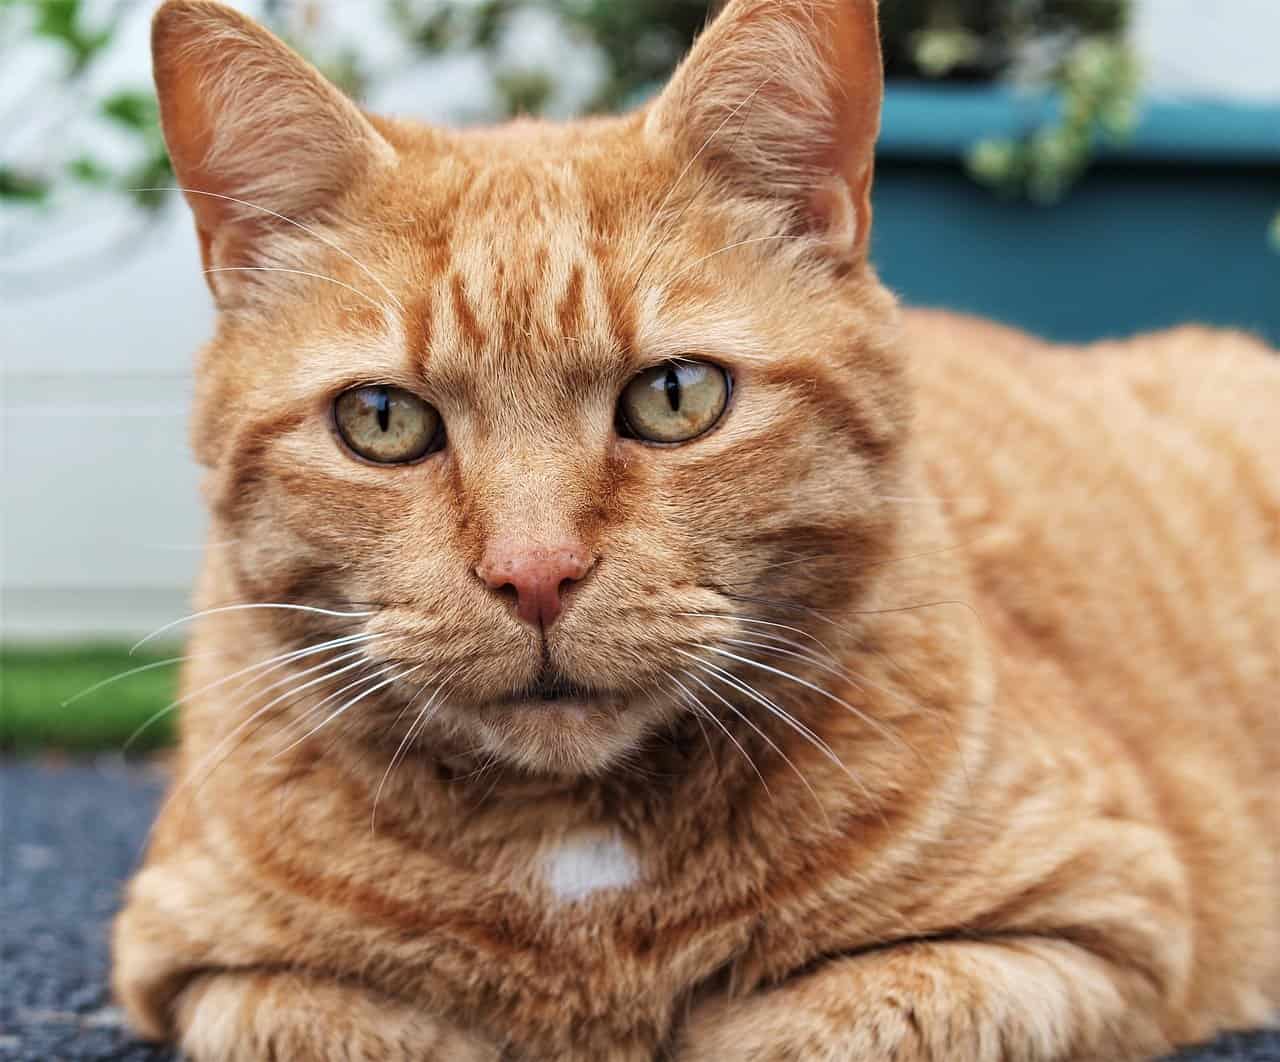 30 Ginger Tabby Cat Facts Too Adorable To Miss 5923